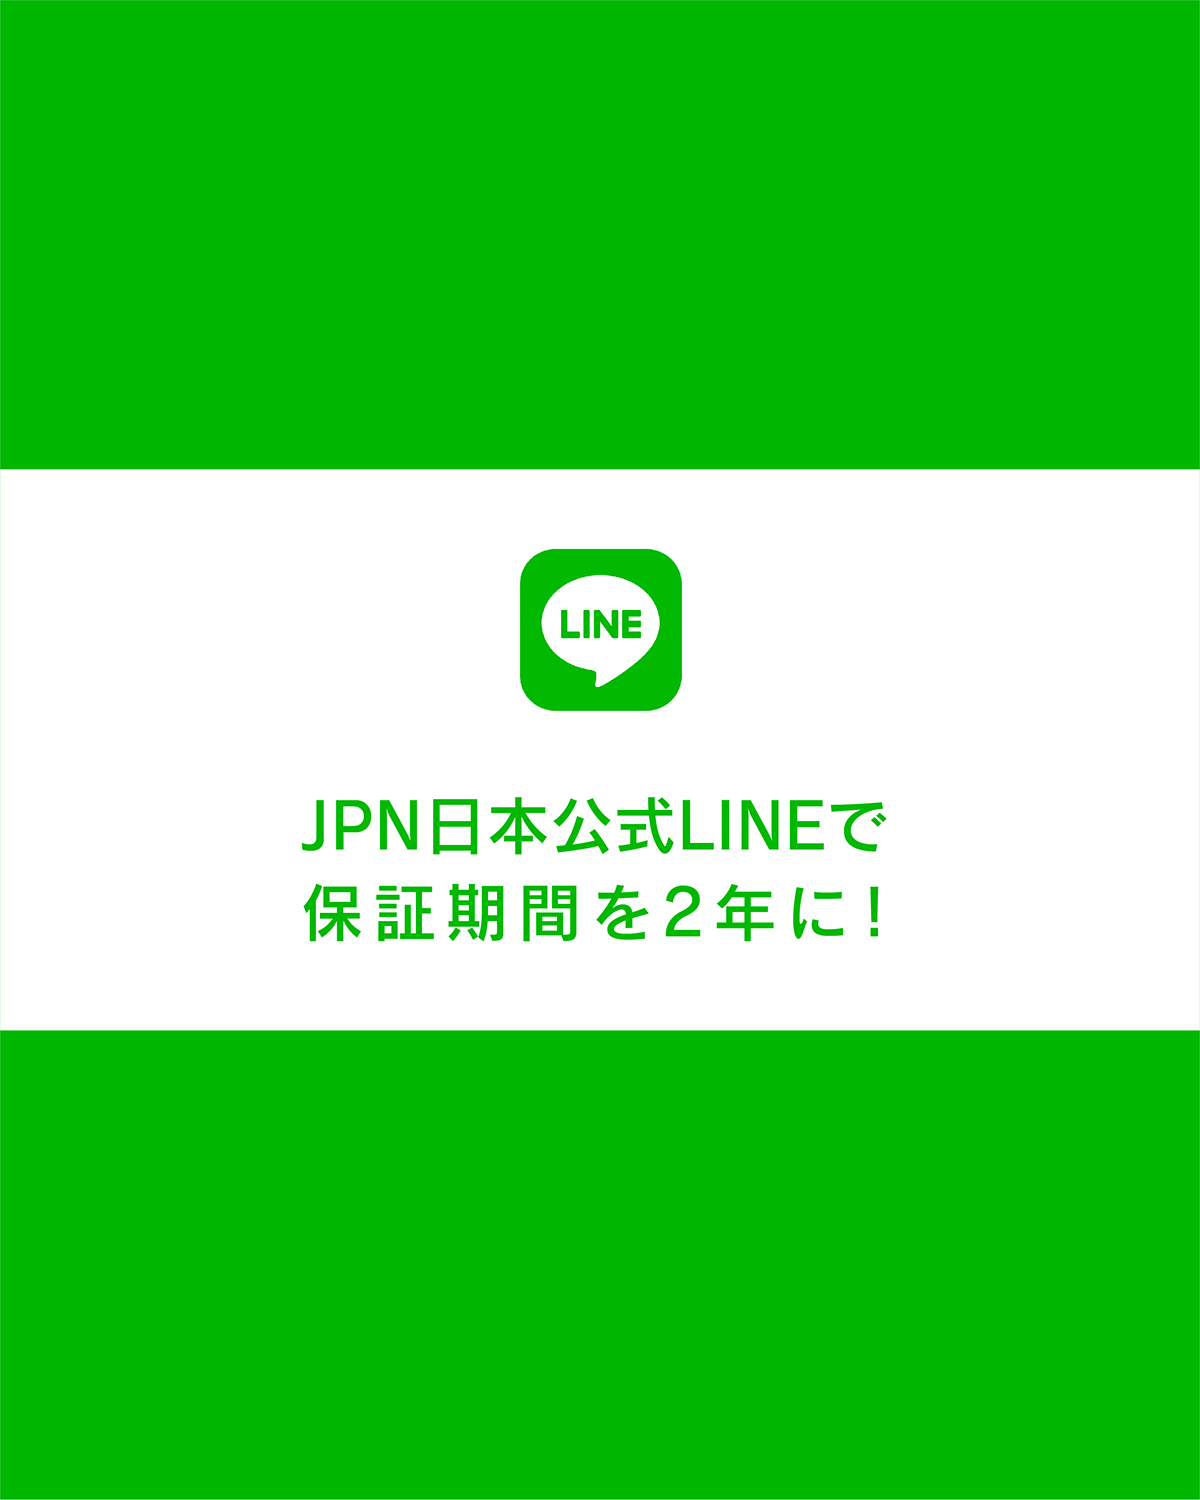 You are currently viewing JPN日本公式LINE登録で保証期間延長